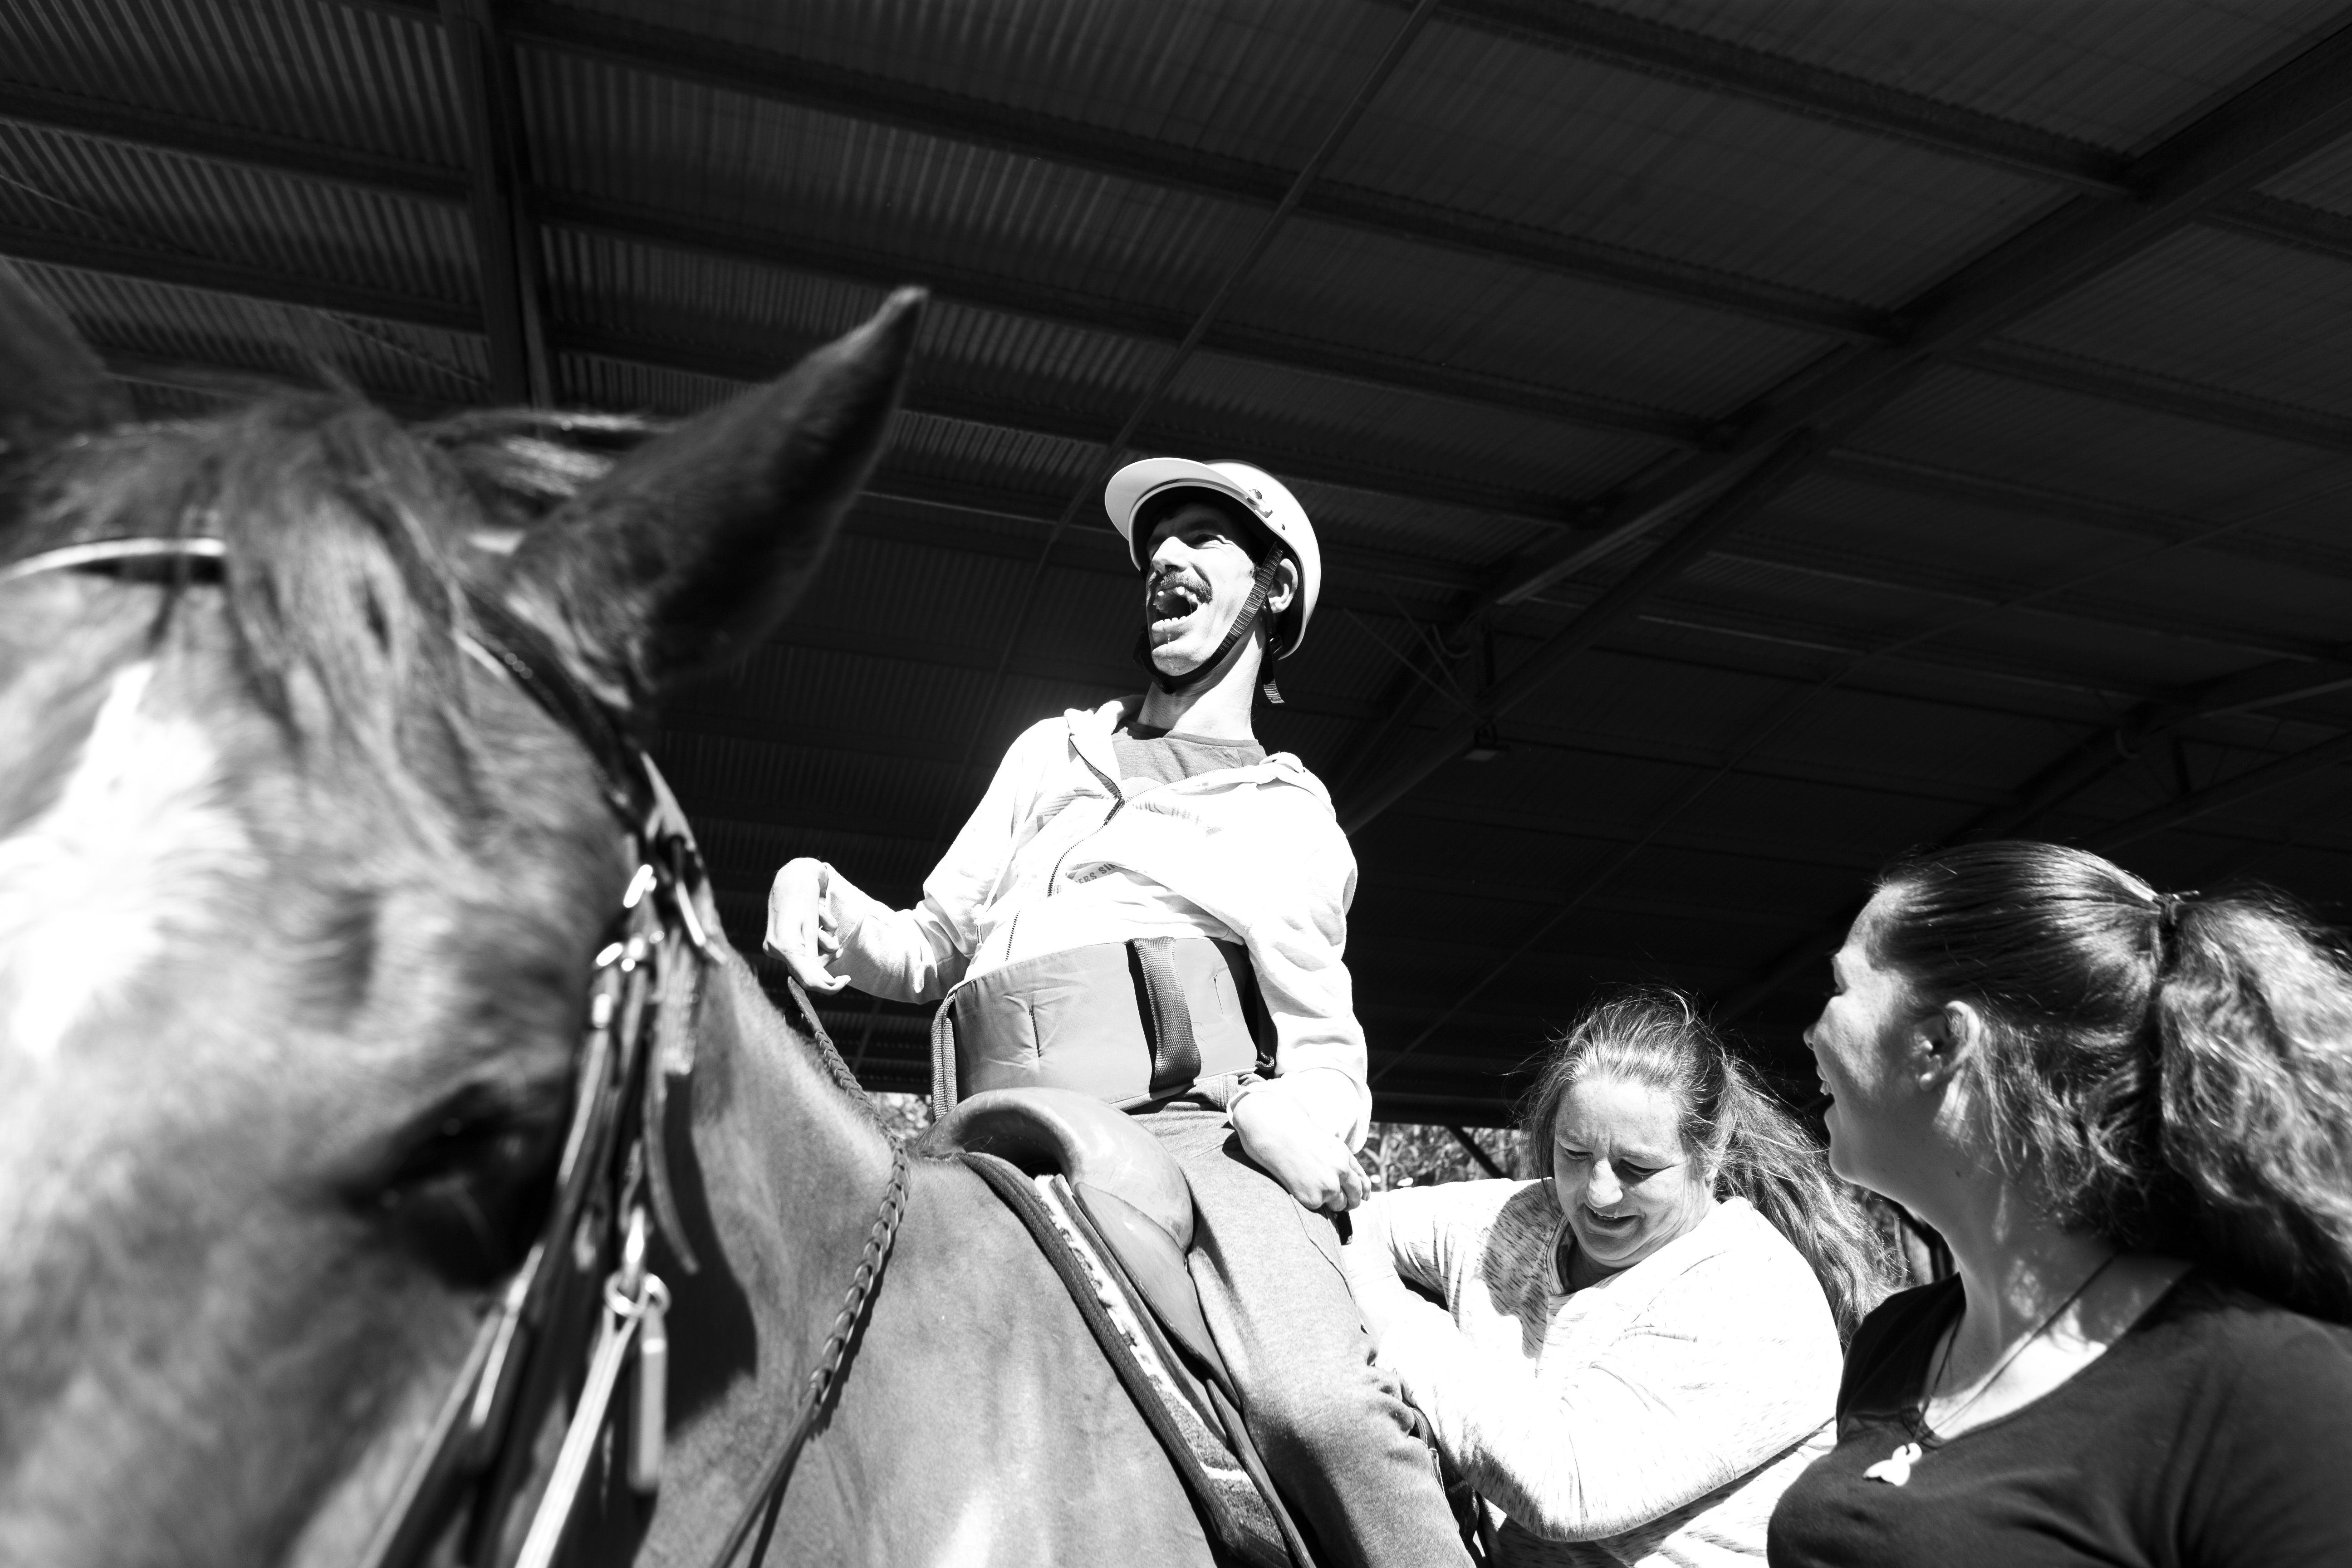 Horse's leading Eurobodalla young men to priceless happiness